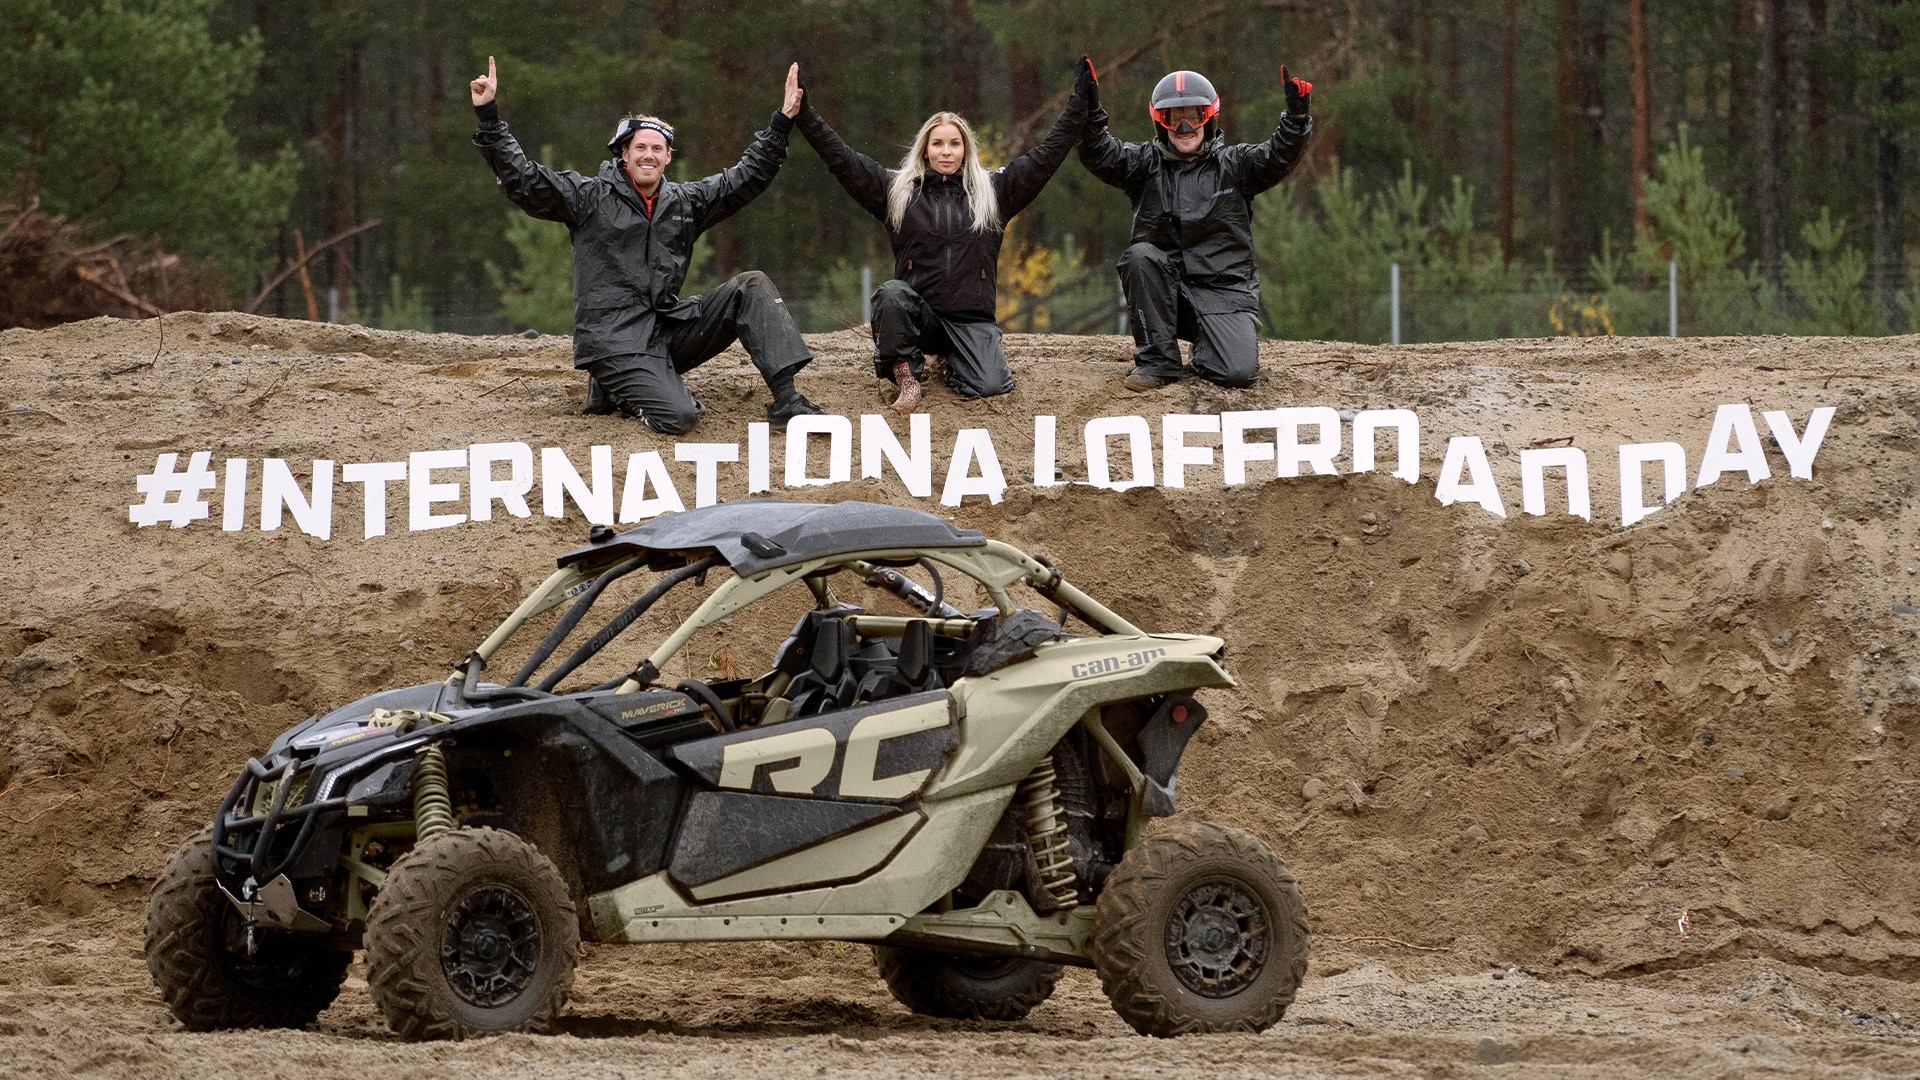 Rider posing for International Off Road Day.